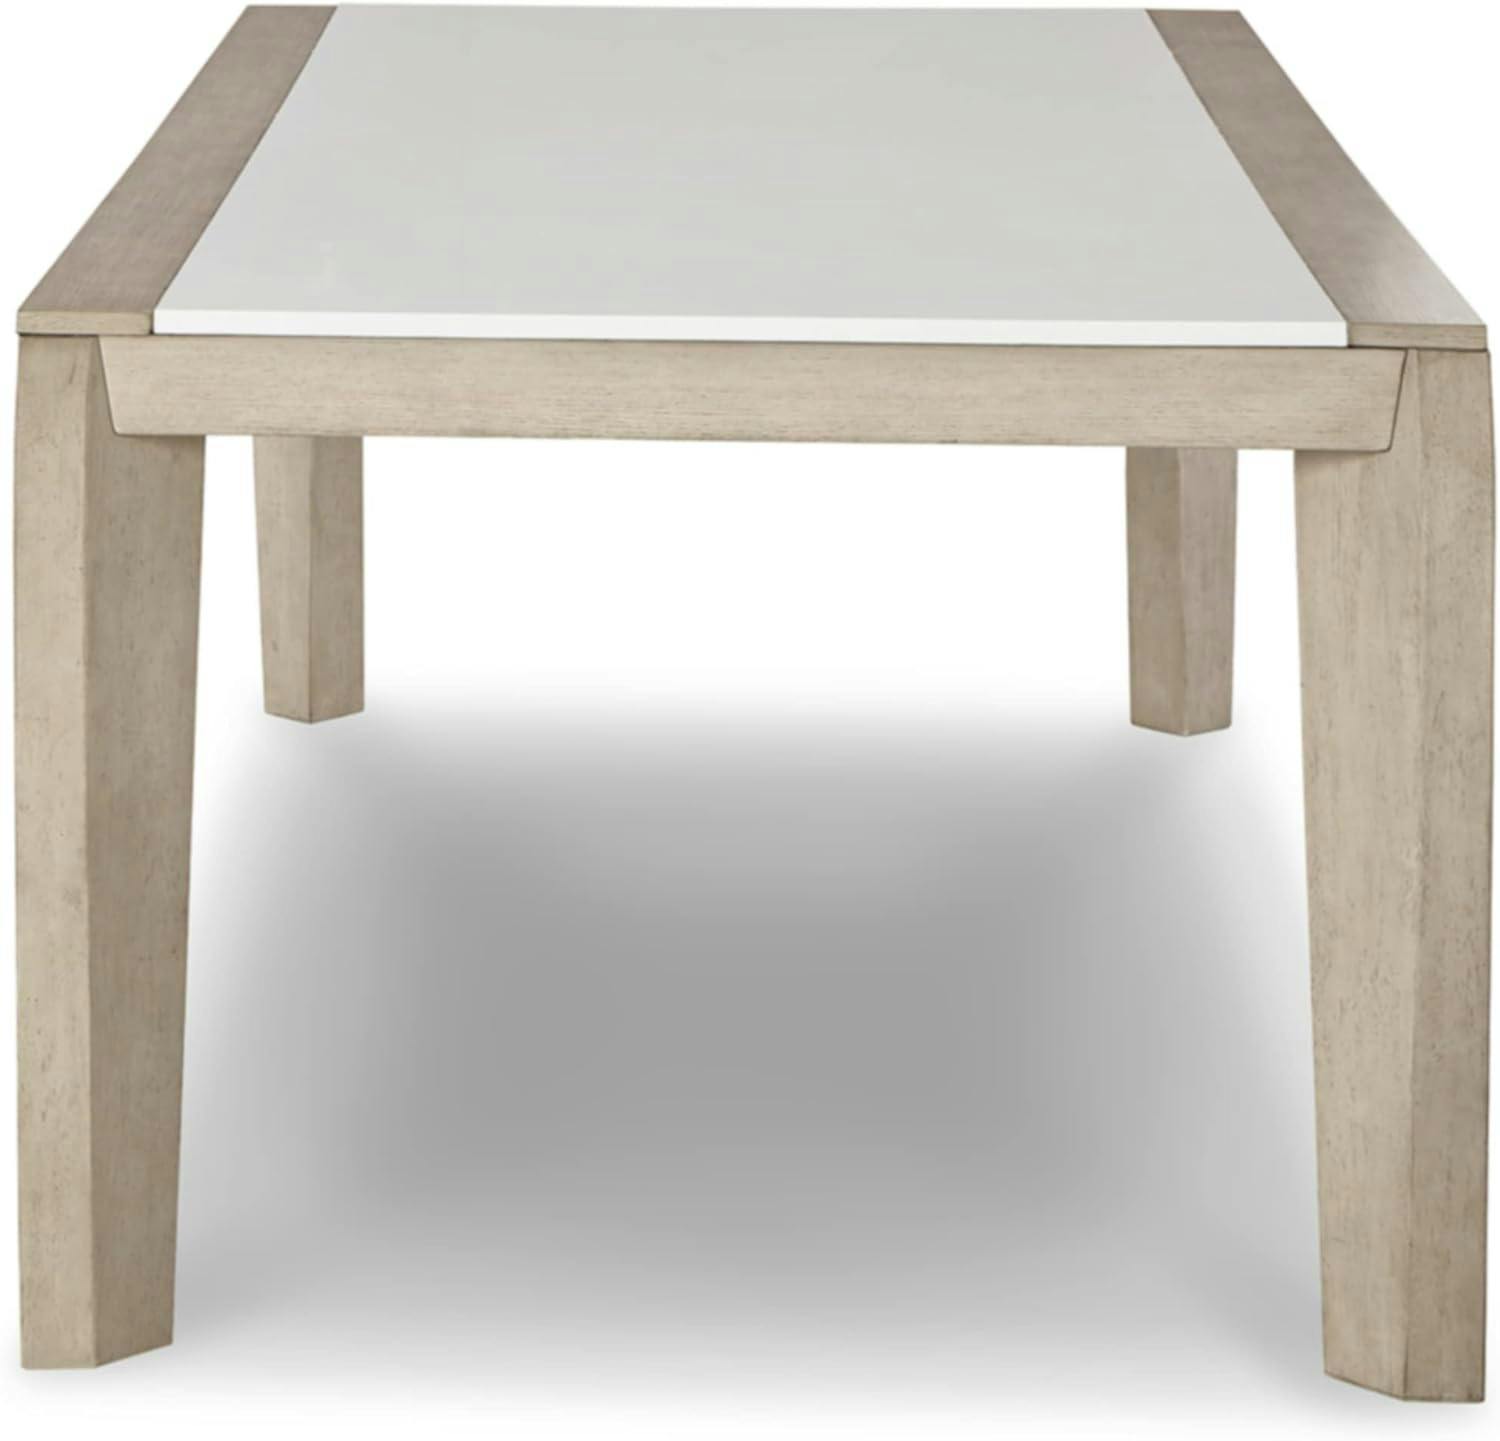 Contemporary Beige & White Wood Dining Table with Acrylic Insert